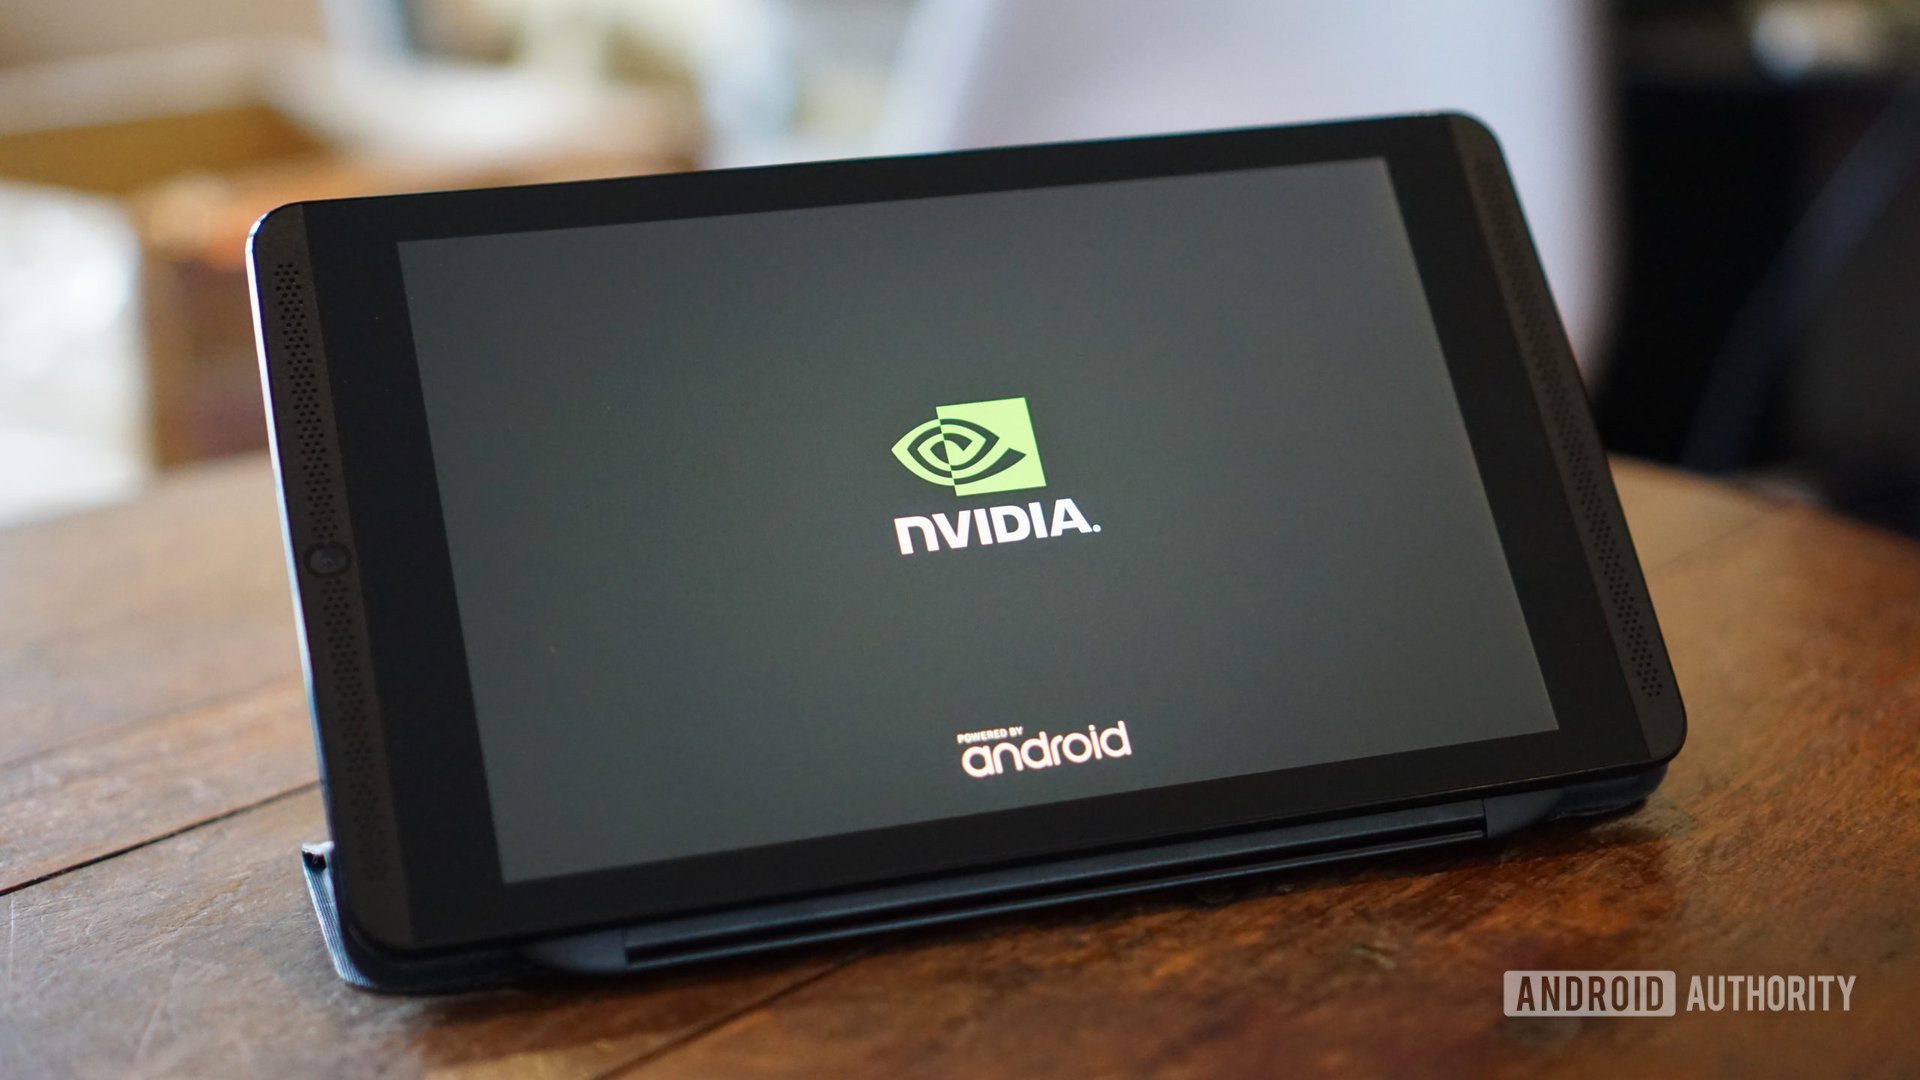 Front view of the Nvidia Shield tablet